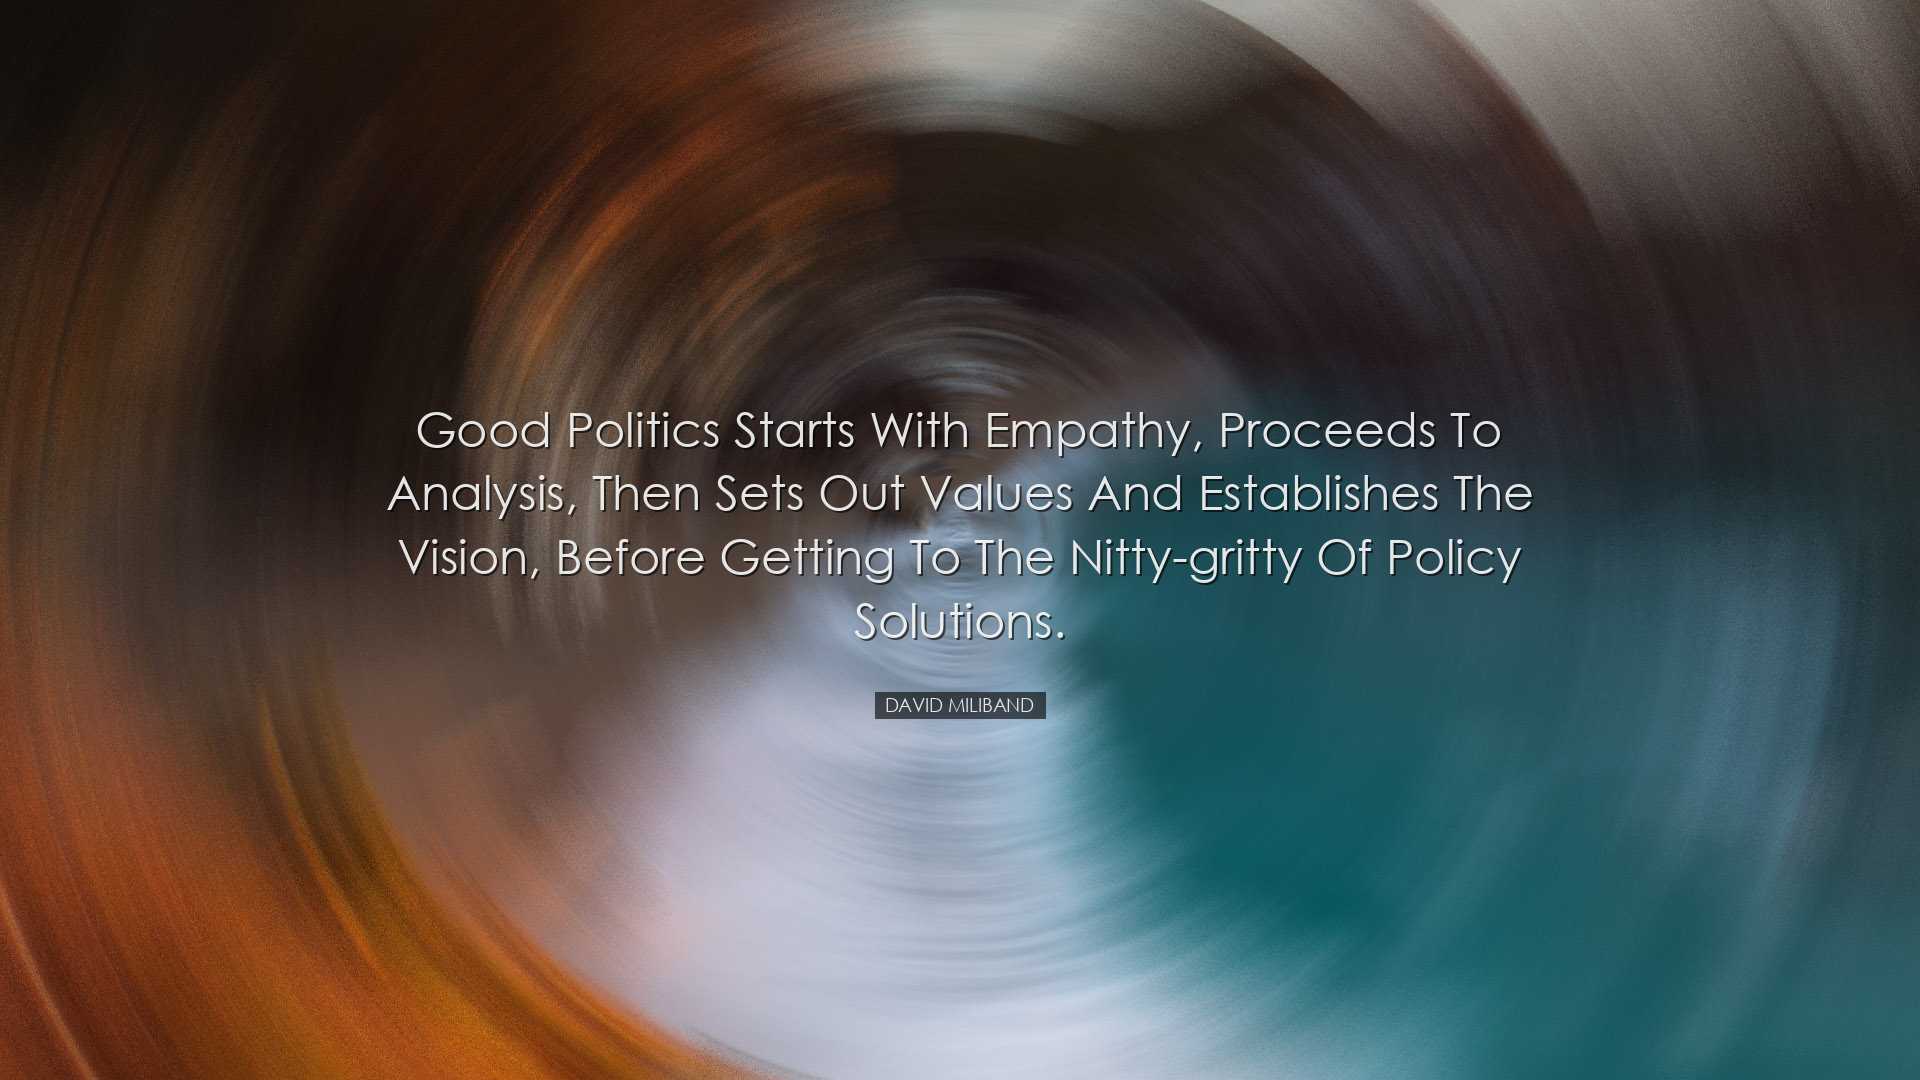 Good politics starts with empathy, proceeds to analysis, then sets